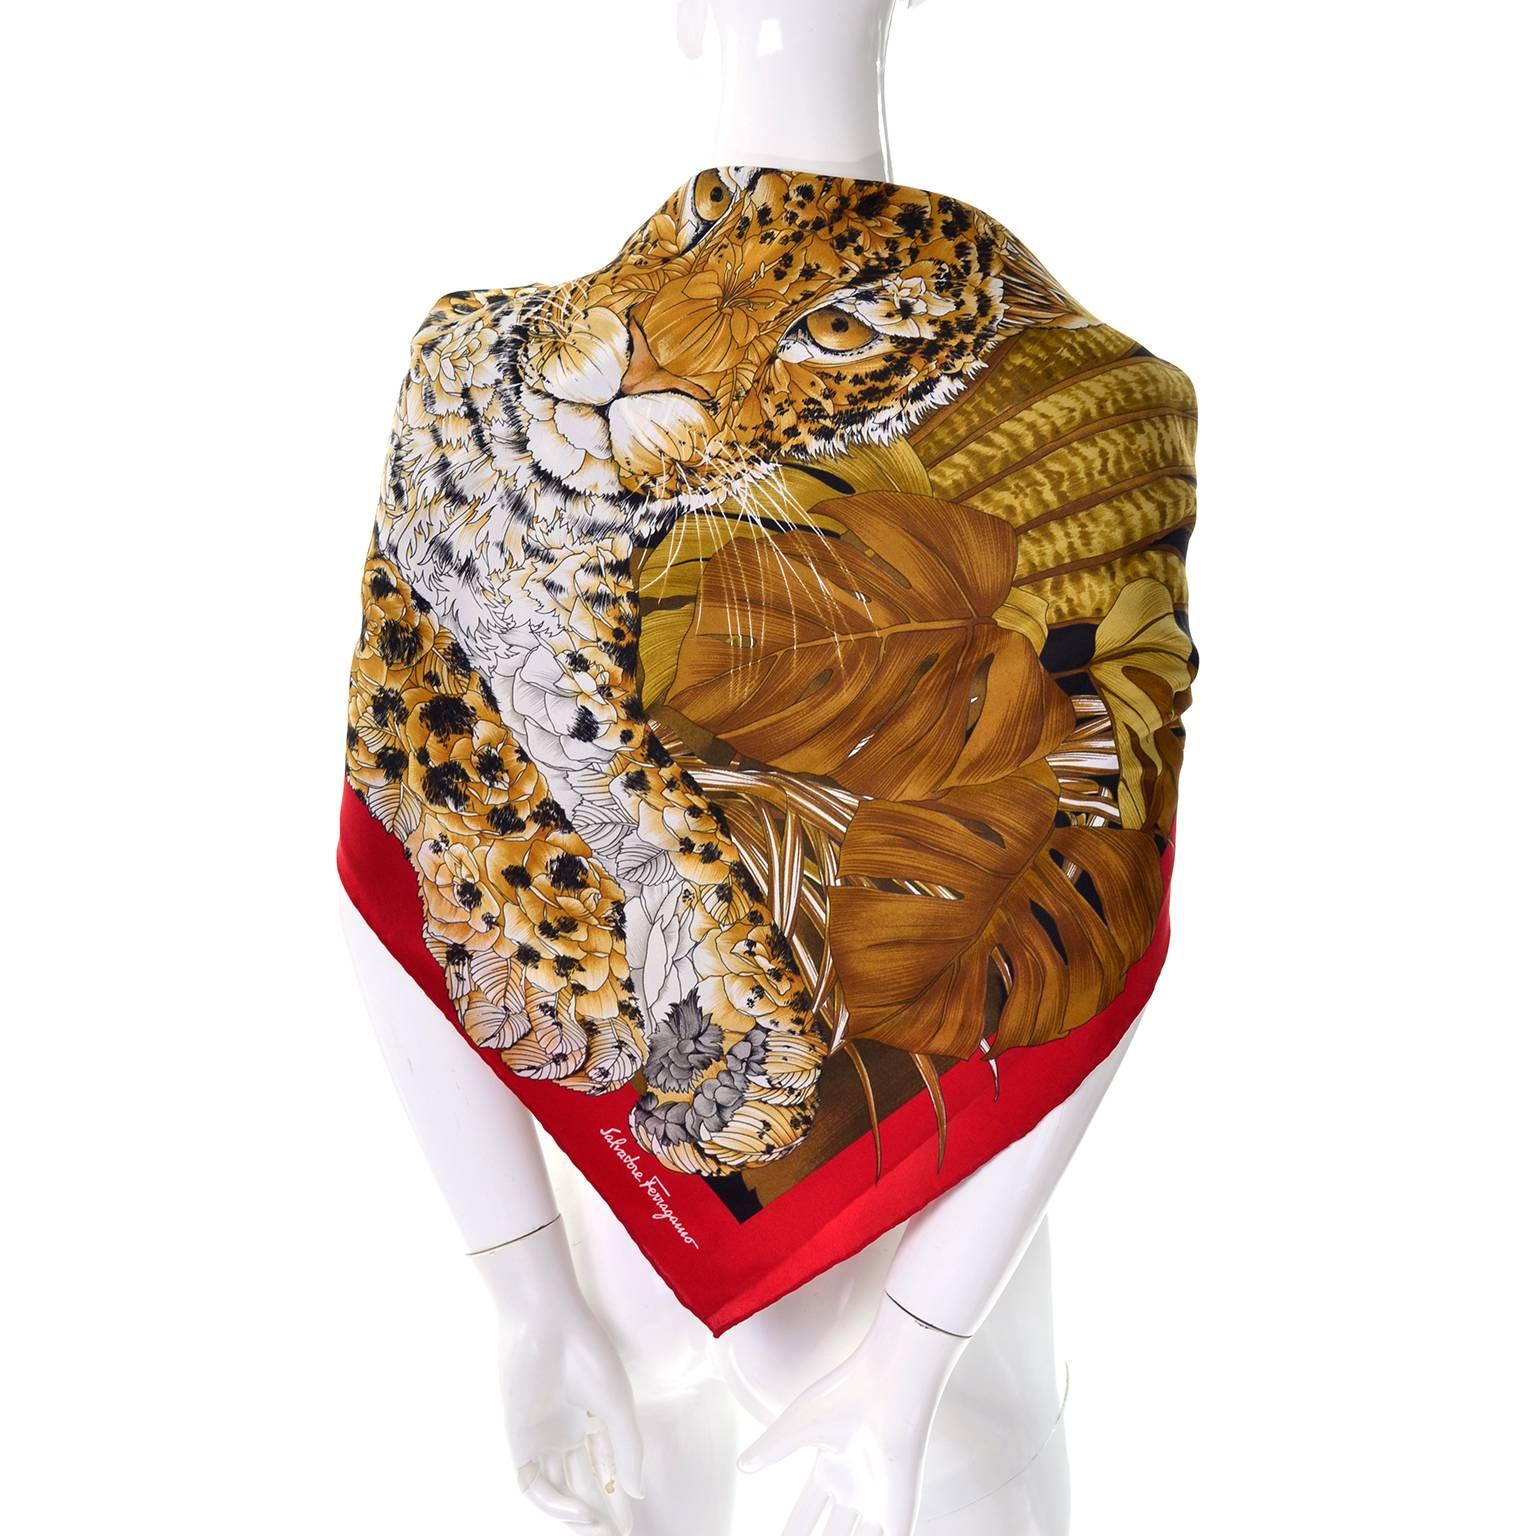 This is a sensational 34" vintage silk scarf from Salvatore Ferragamo. The scarf has a leopard in the jungle print in red, gold and brown and hand rolled edges.  This beautiful vintage scarf was made in Italy and is in excellent condition.